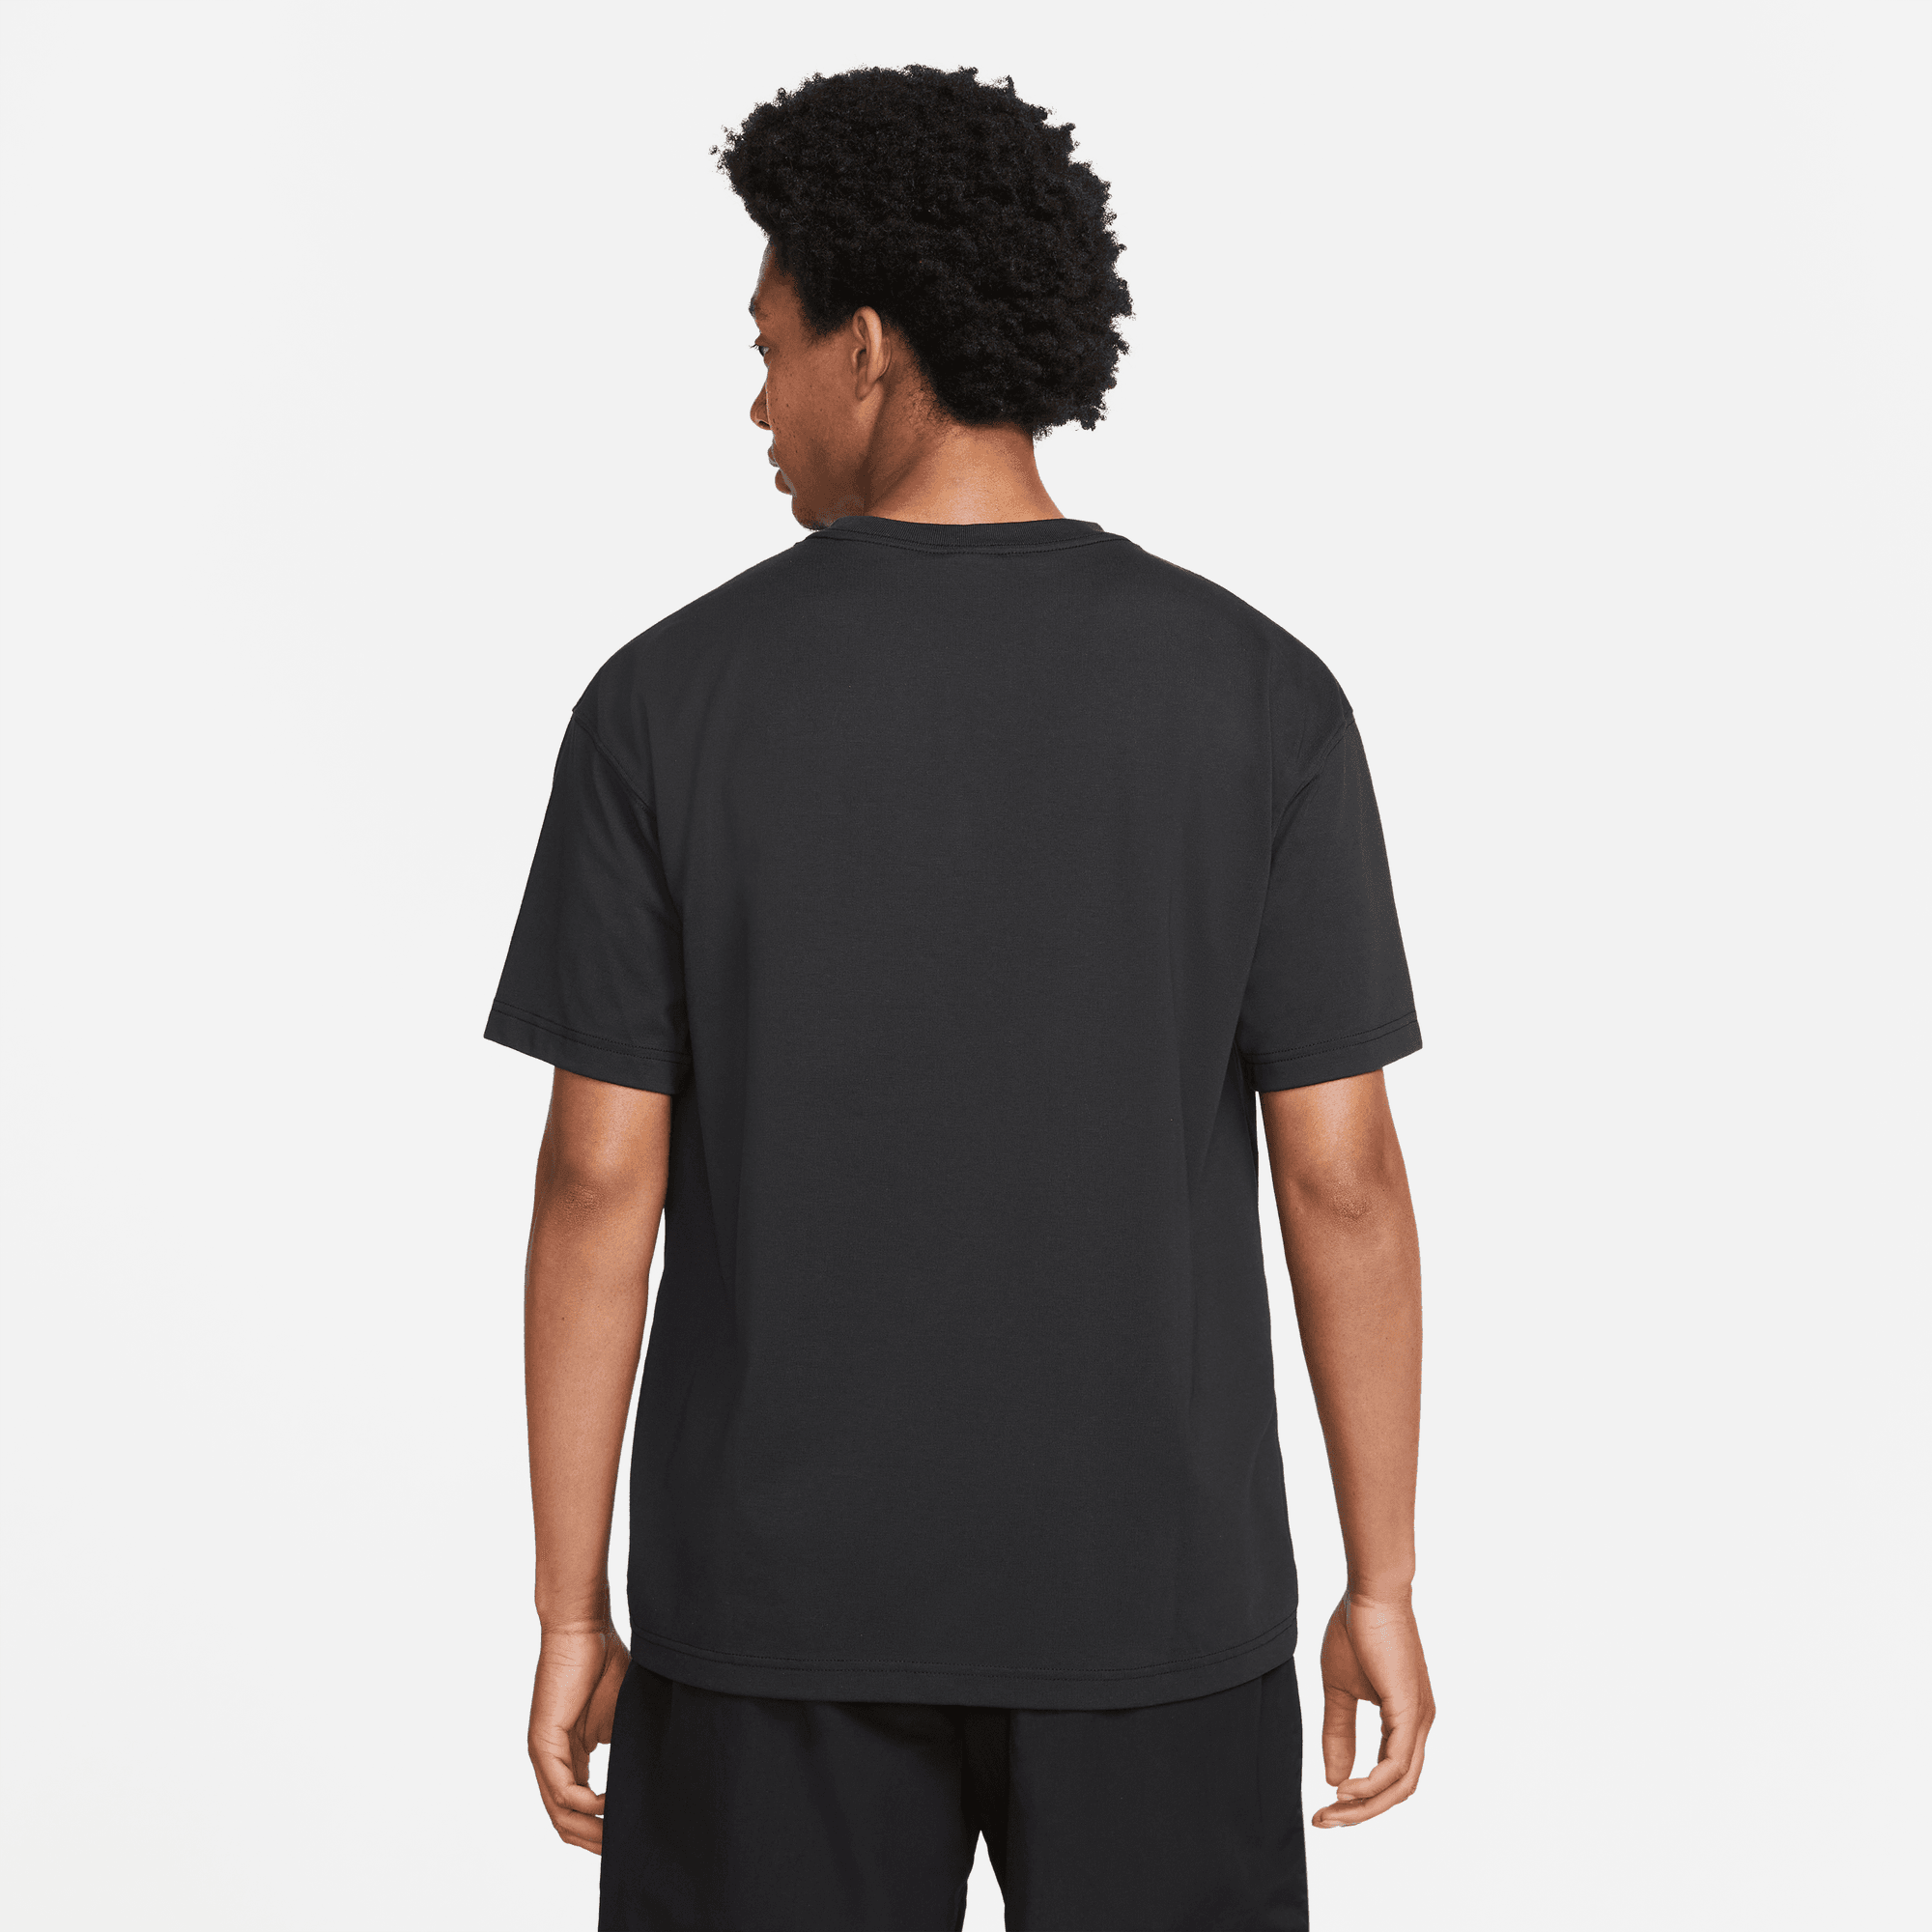 Nike ACG 'All Conditions Gear' Black T-Shirt